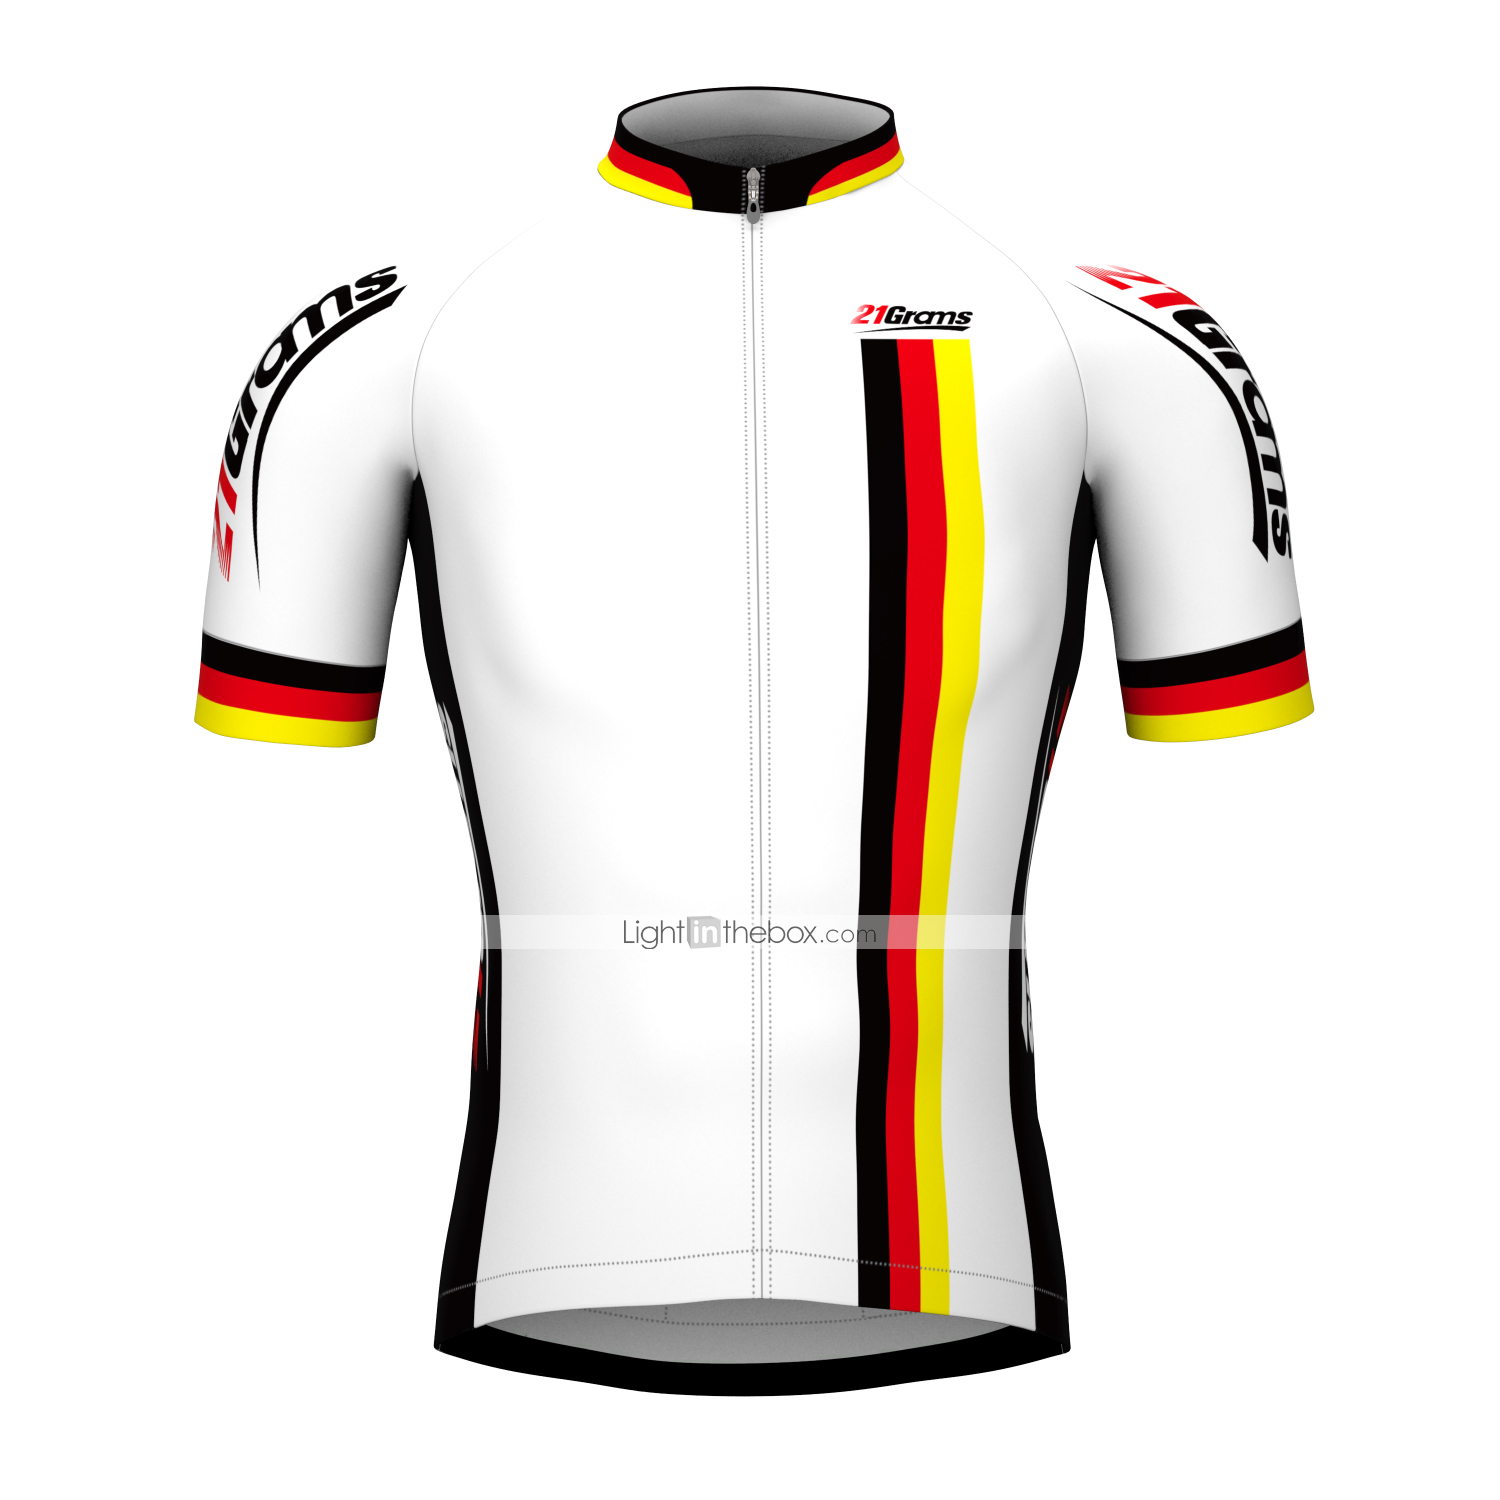 21 grams cycling jersey